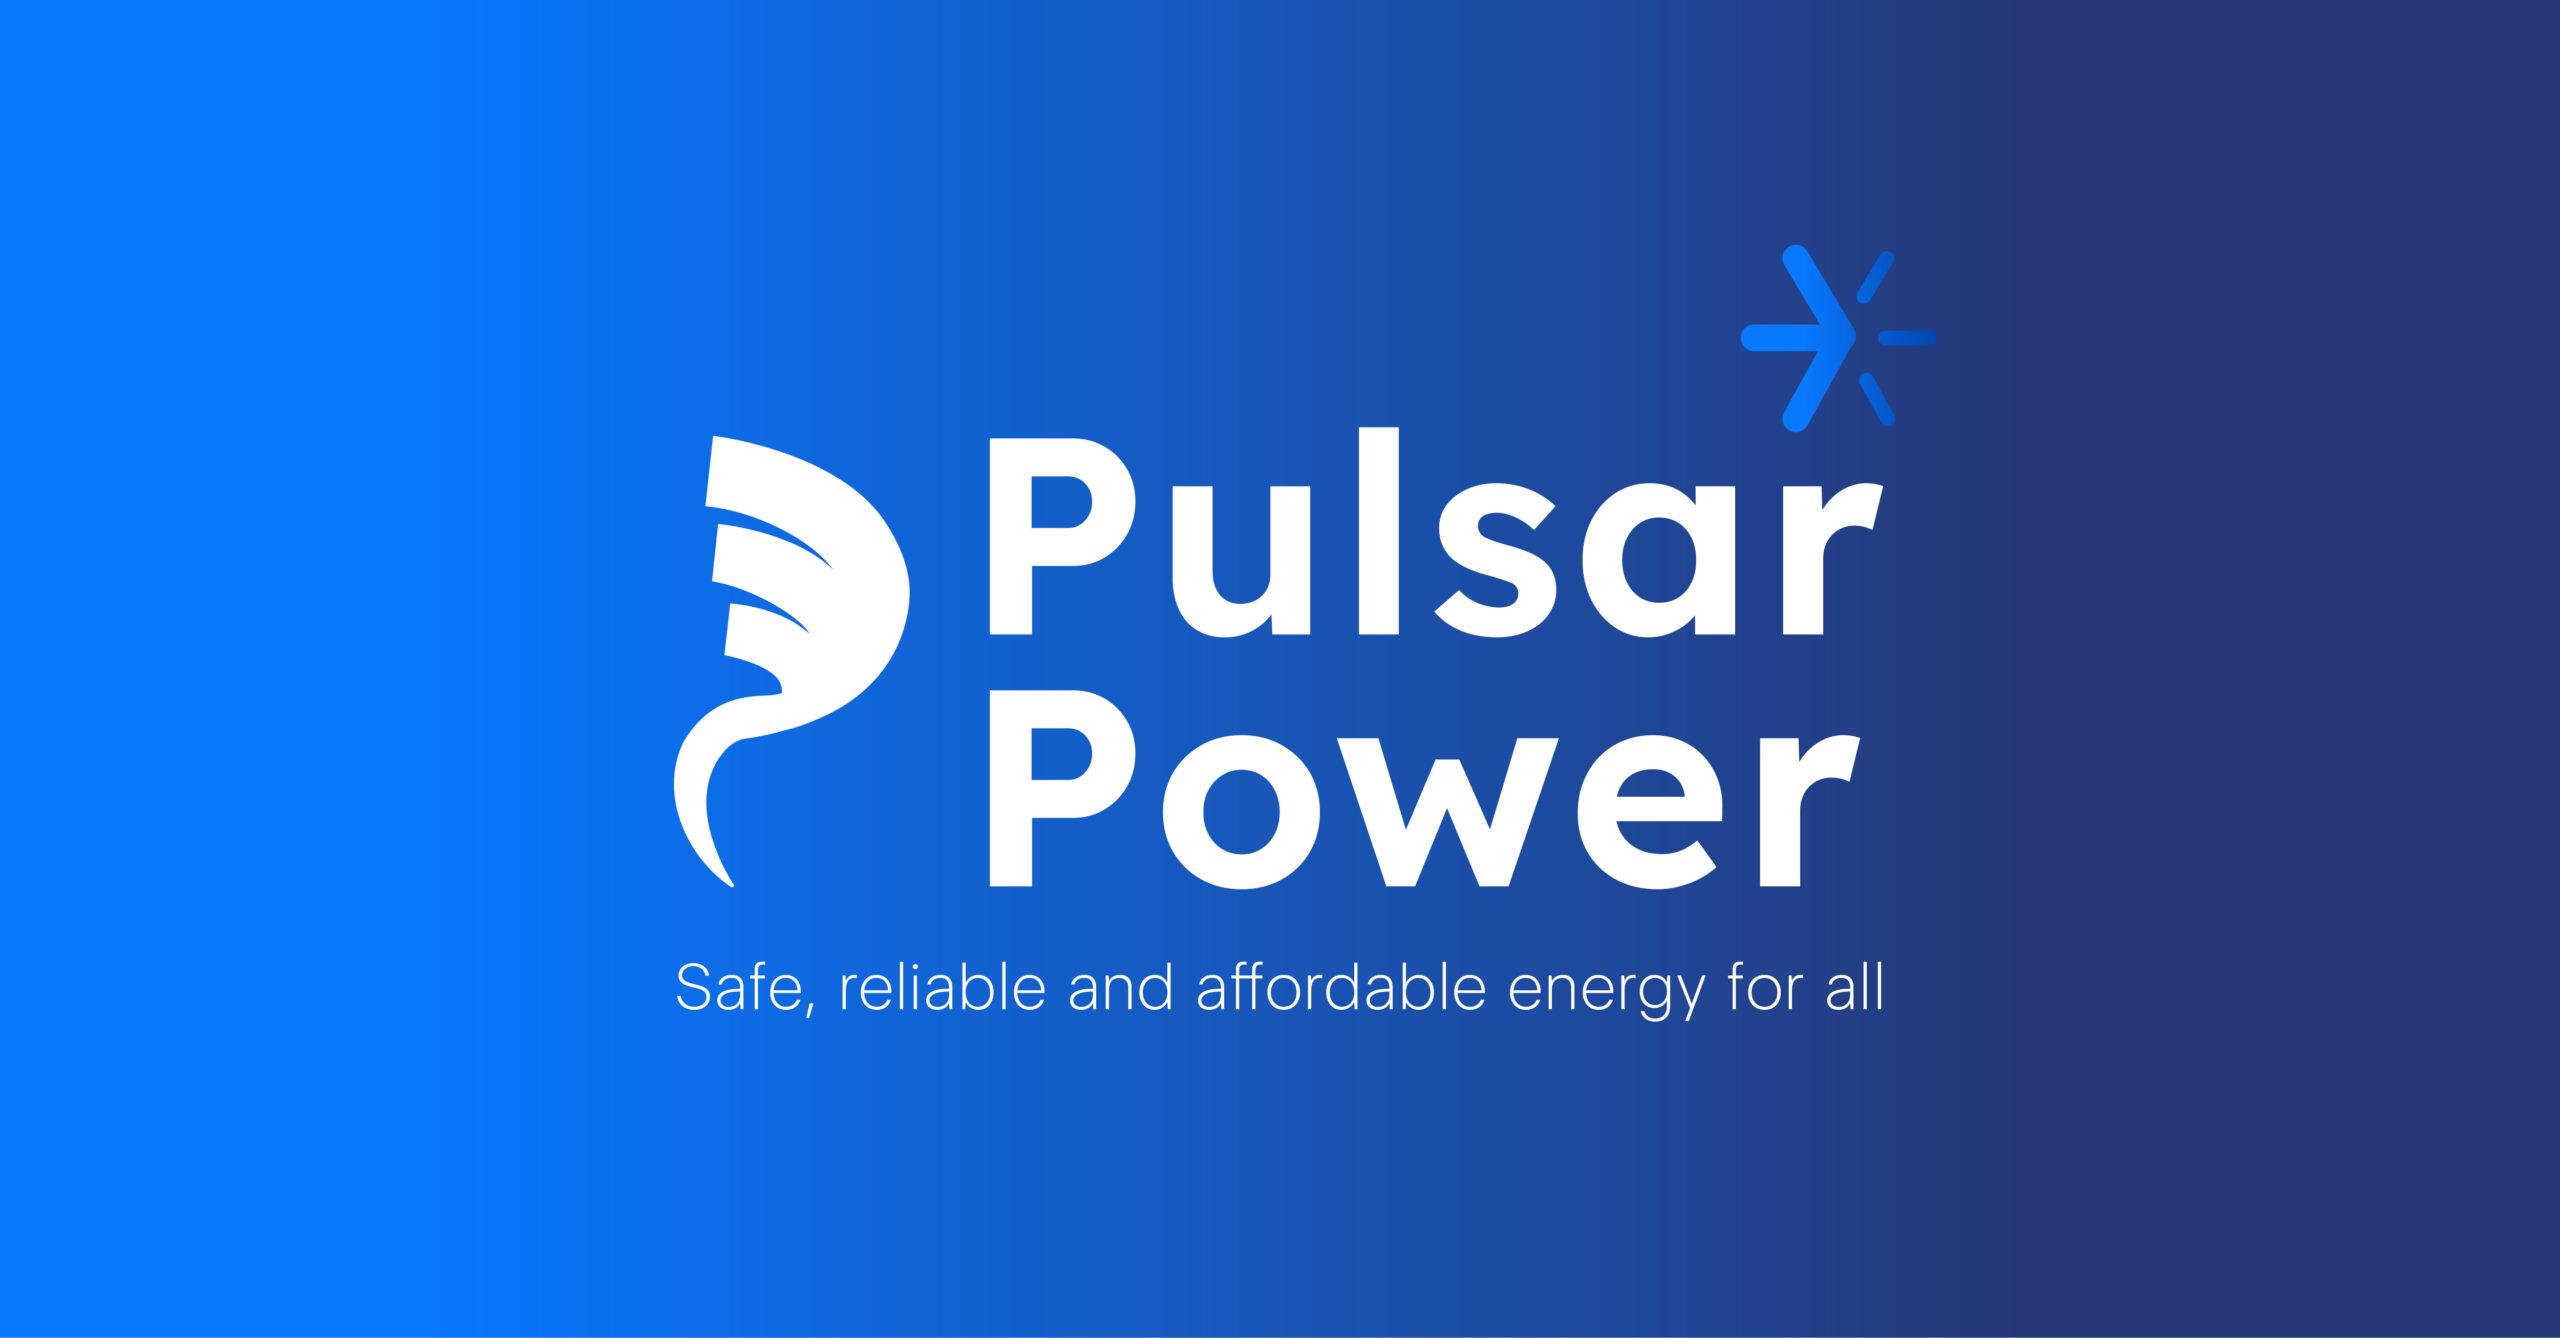 Product Pulsar Power I Discover our services I Renewable energy image